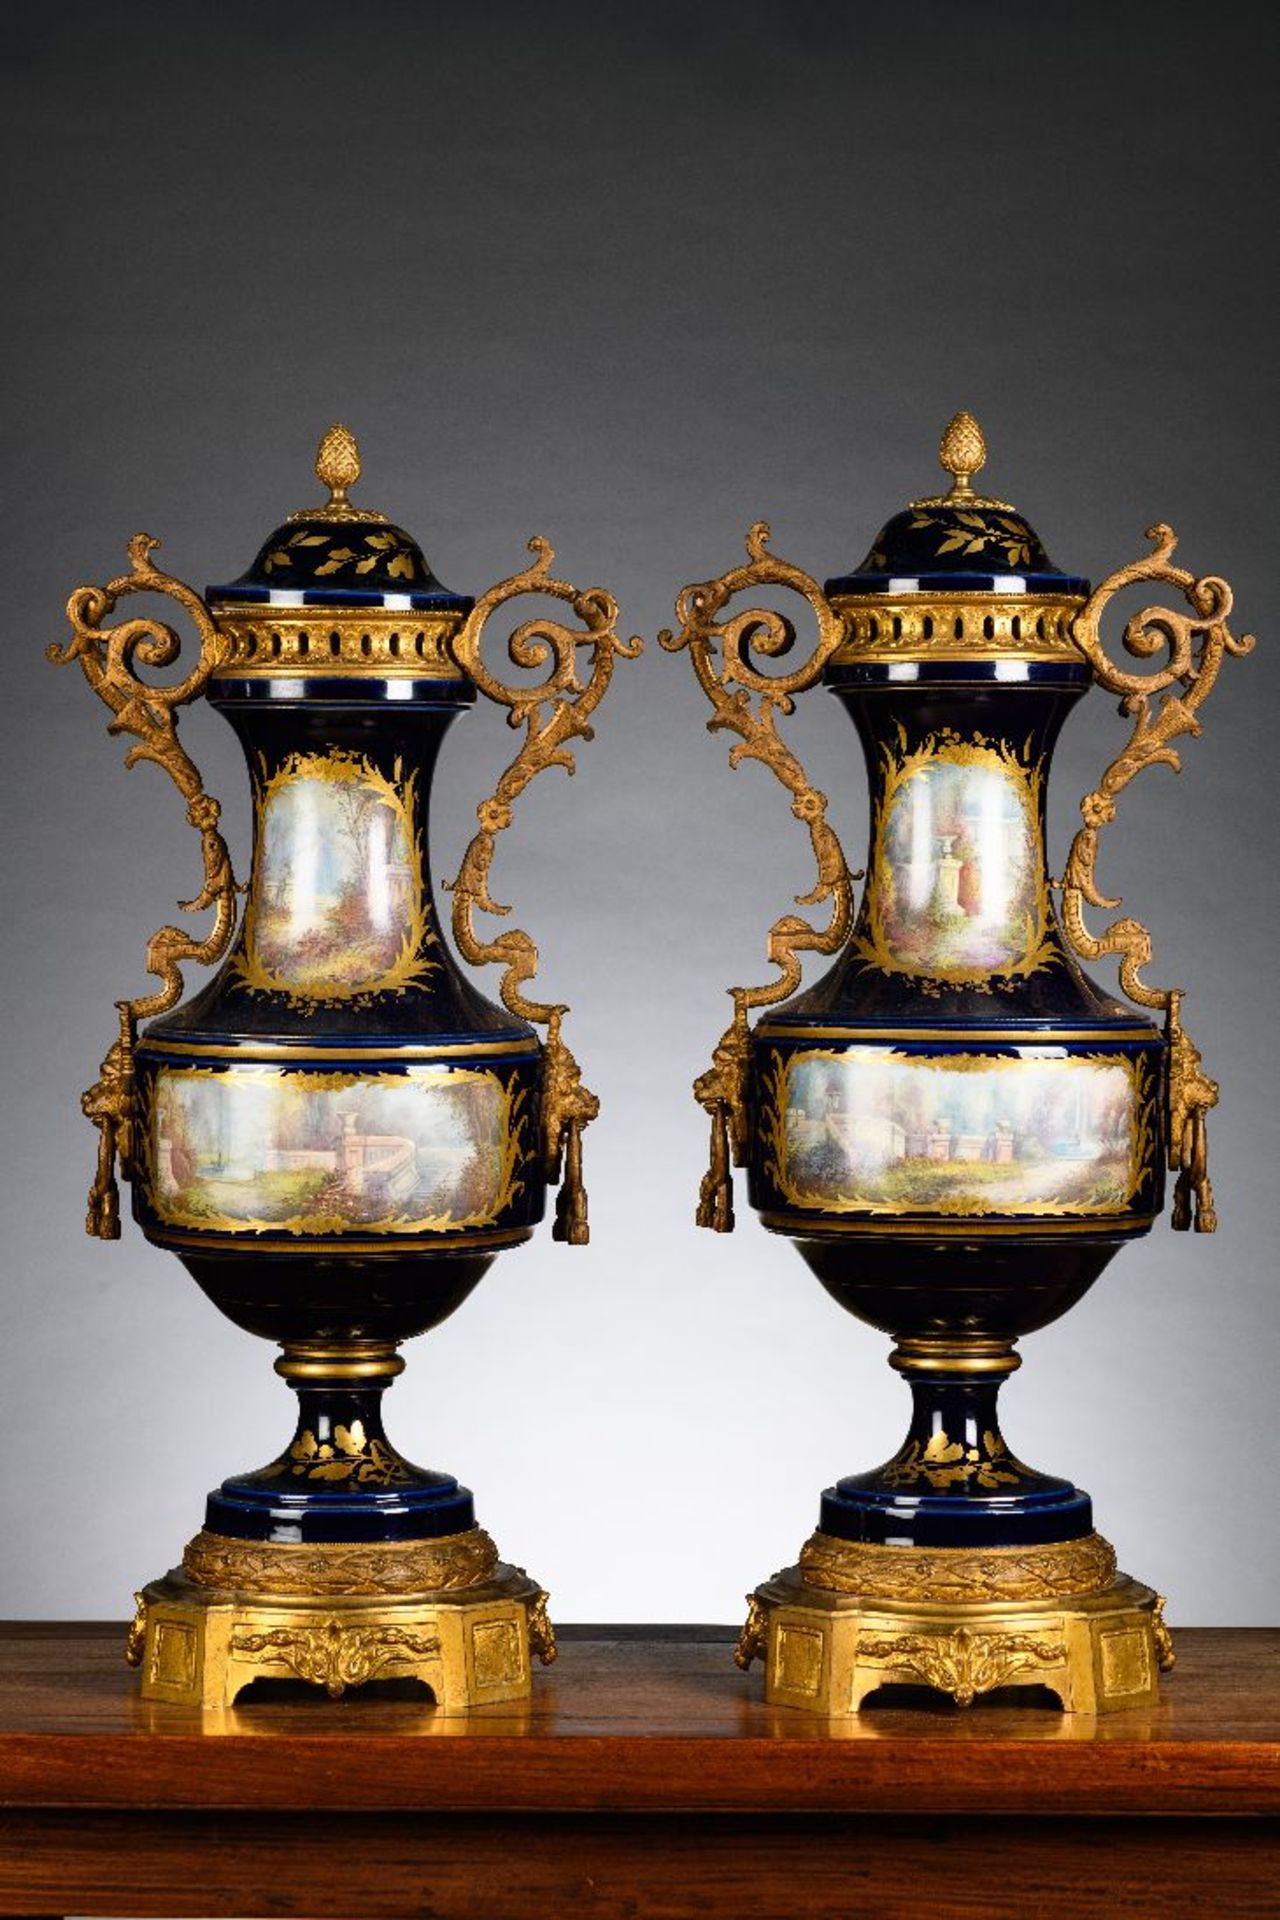 A pair of Sèvres porcelain vases with gilt bronze mounts, 19th century (*) - Image 3 of 9